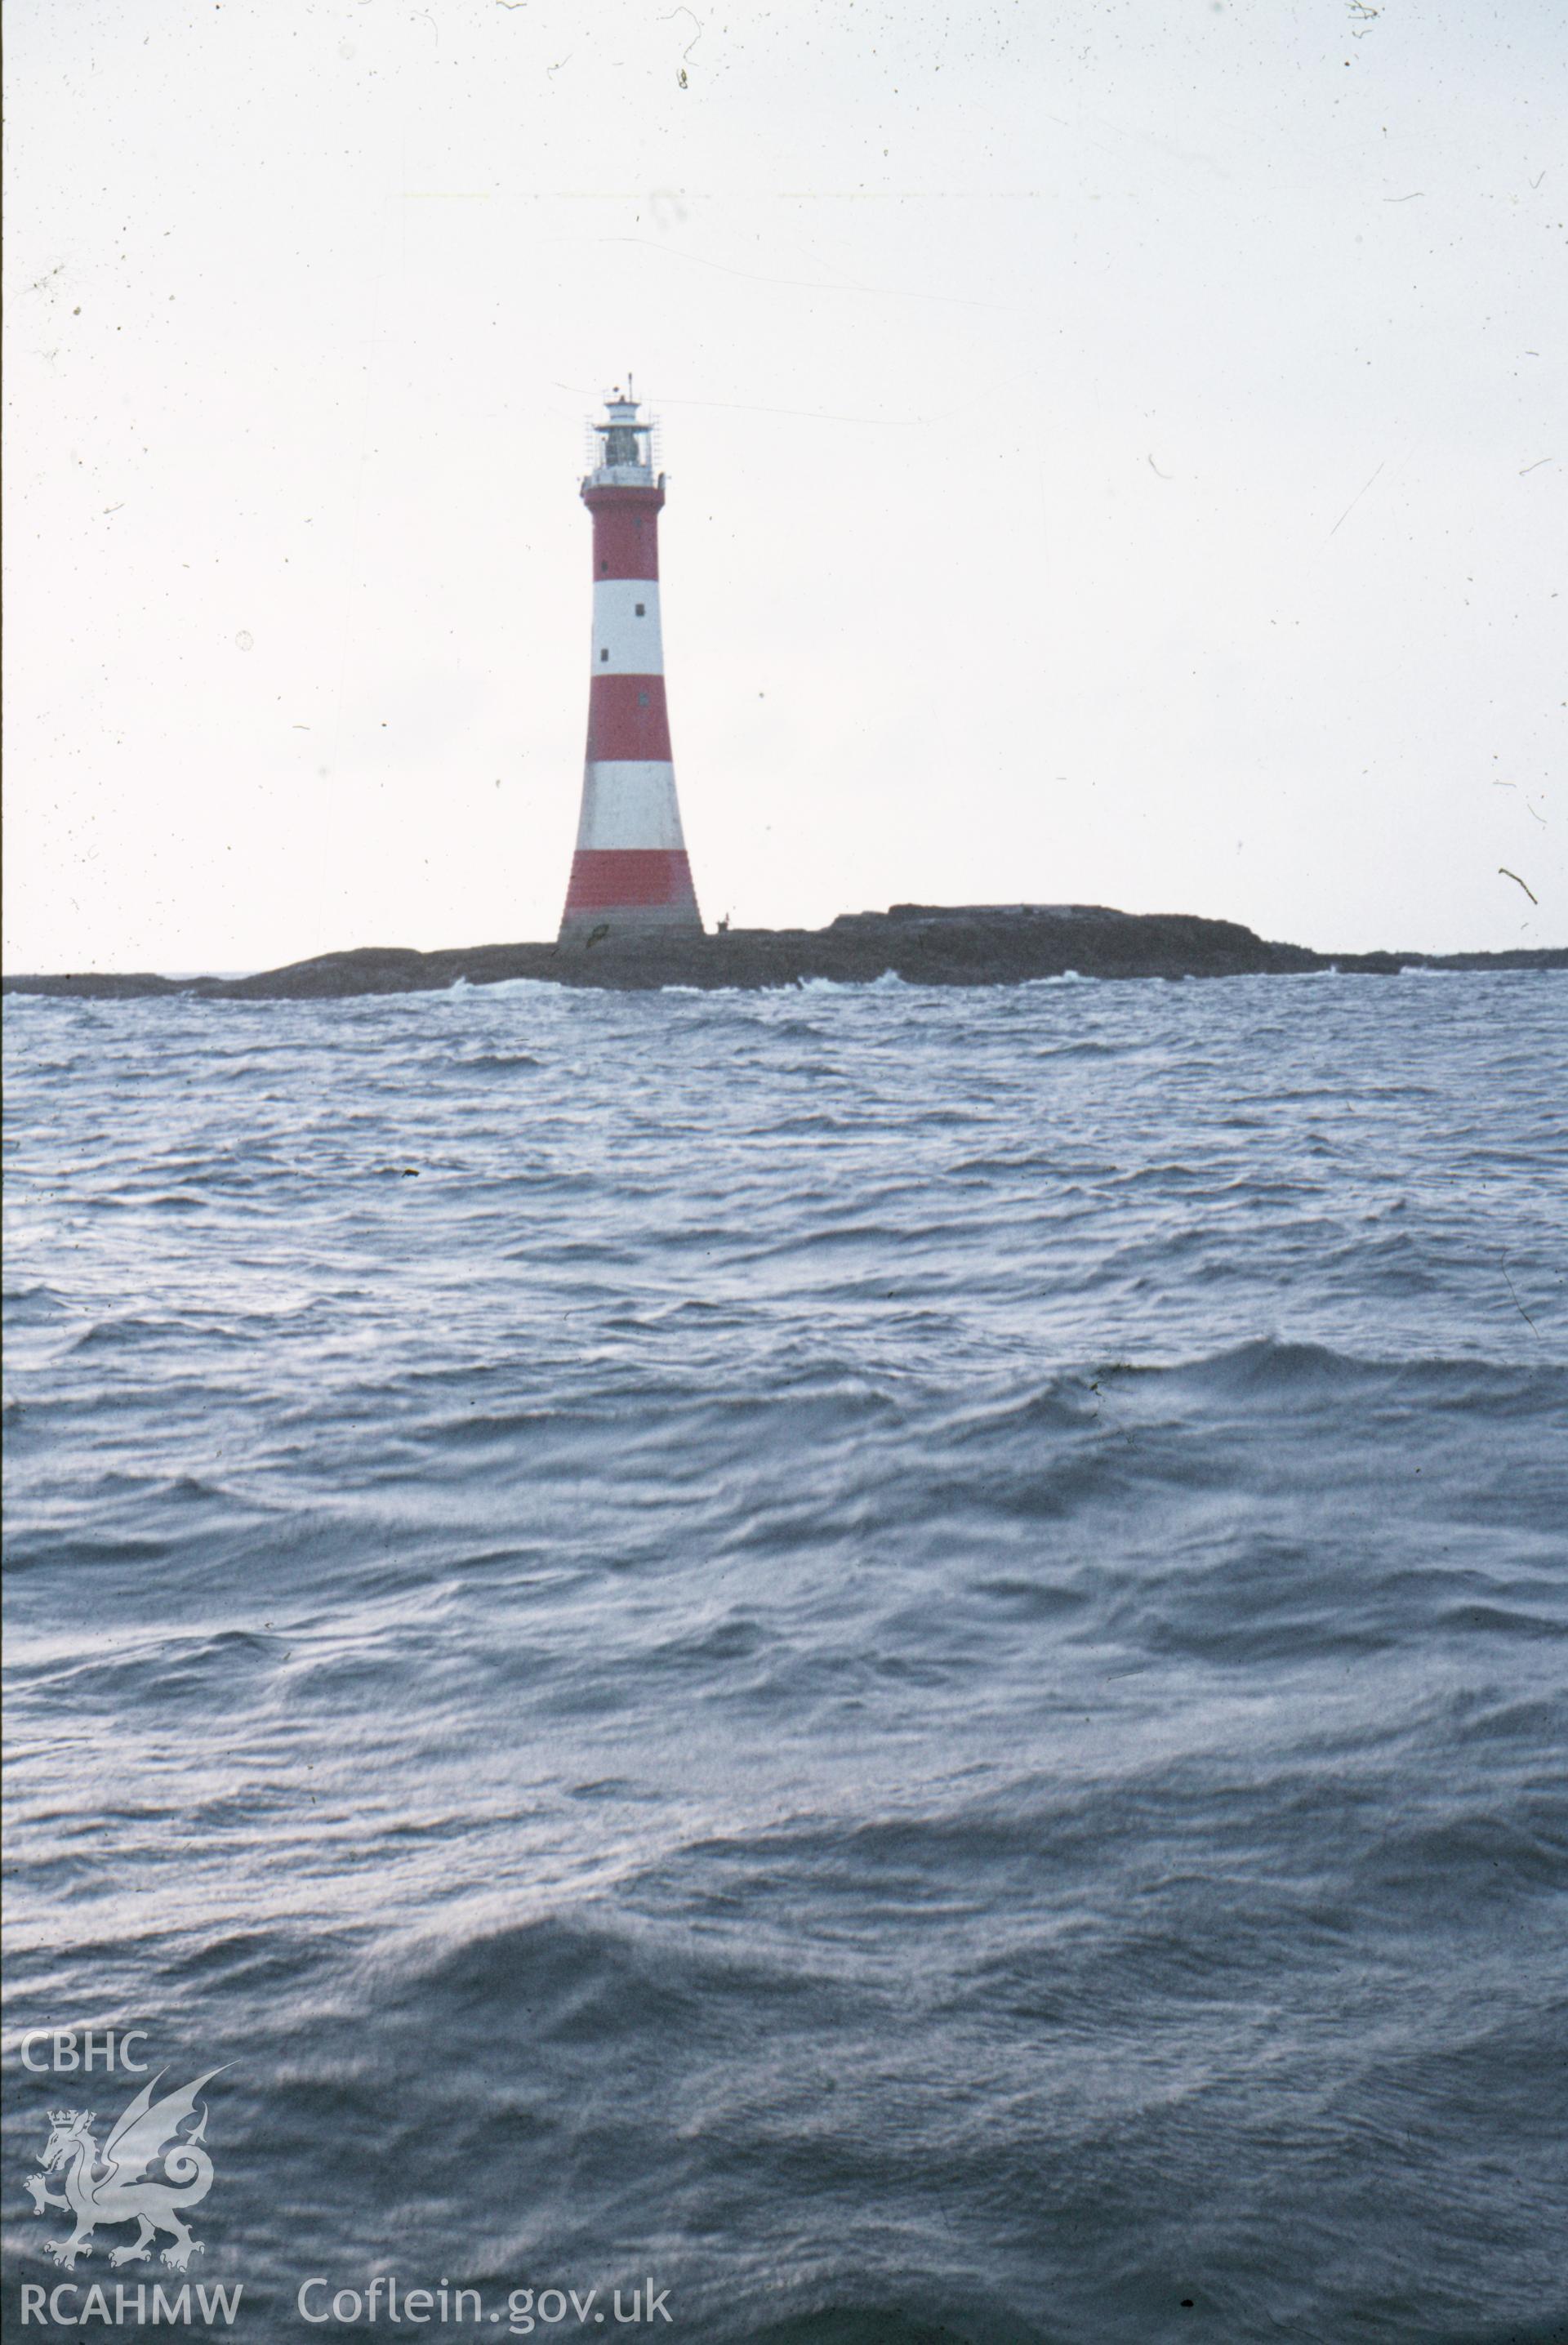 Colour slide showing view of the Smalls Lighthouse from the sea.